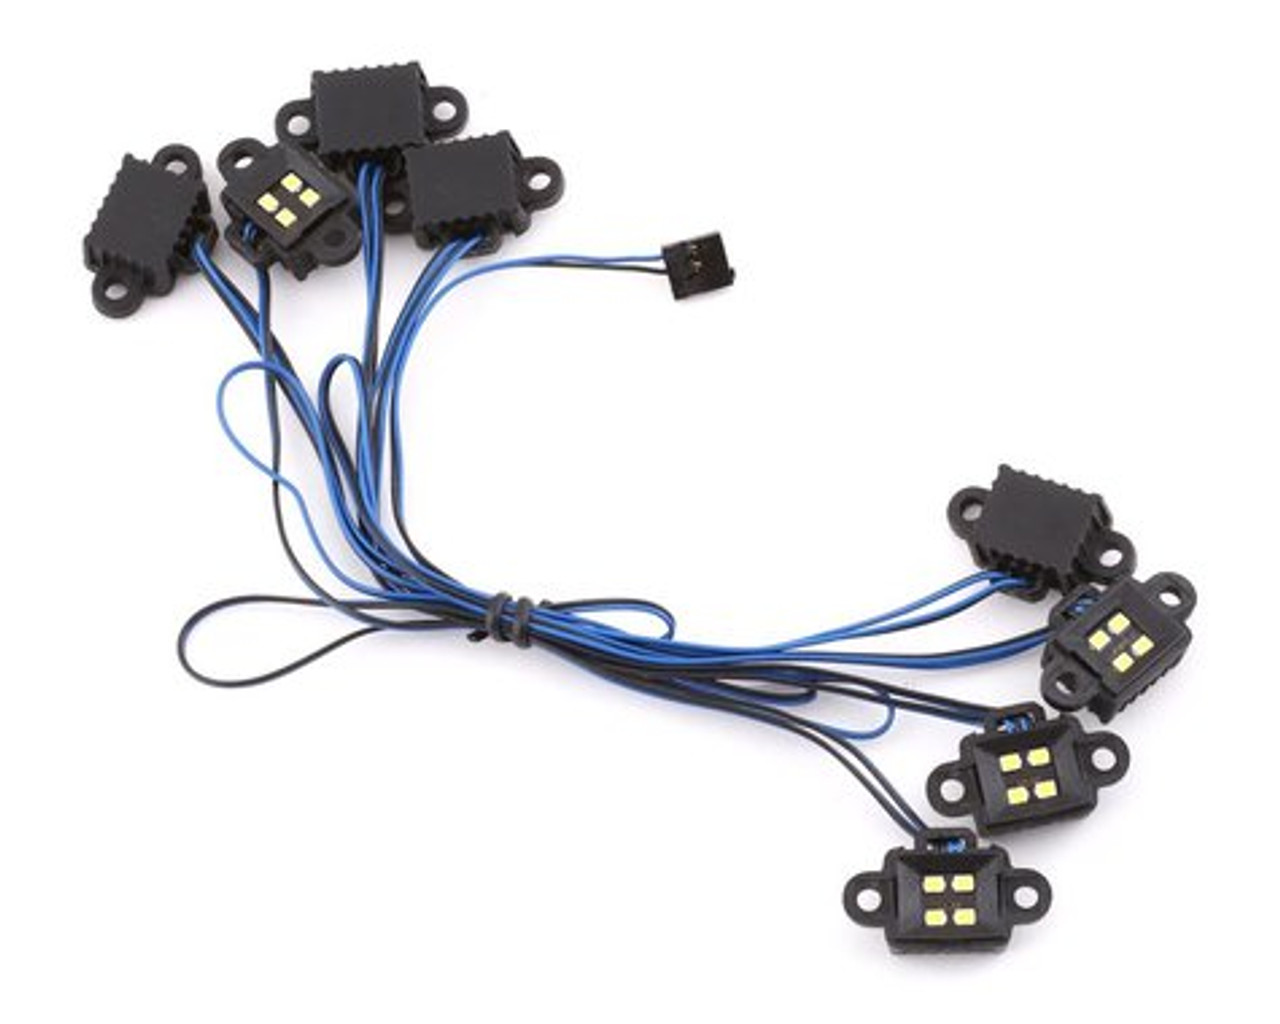 TRAXXAS LED rock light kit, TRX-4 /TRX-6  (requires #8028 power supply and #8018, #8072, or #8080 inner fenders)